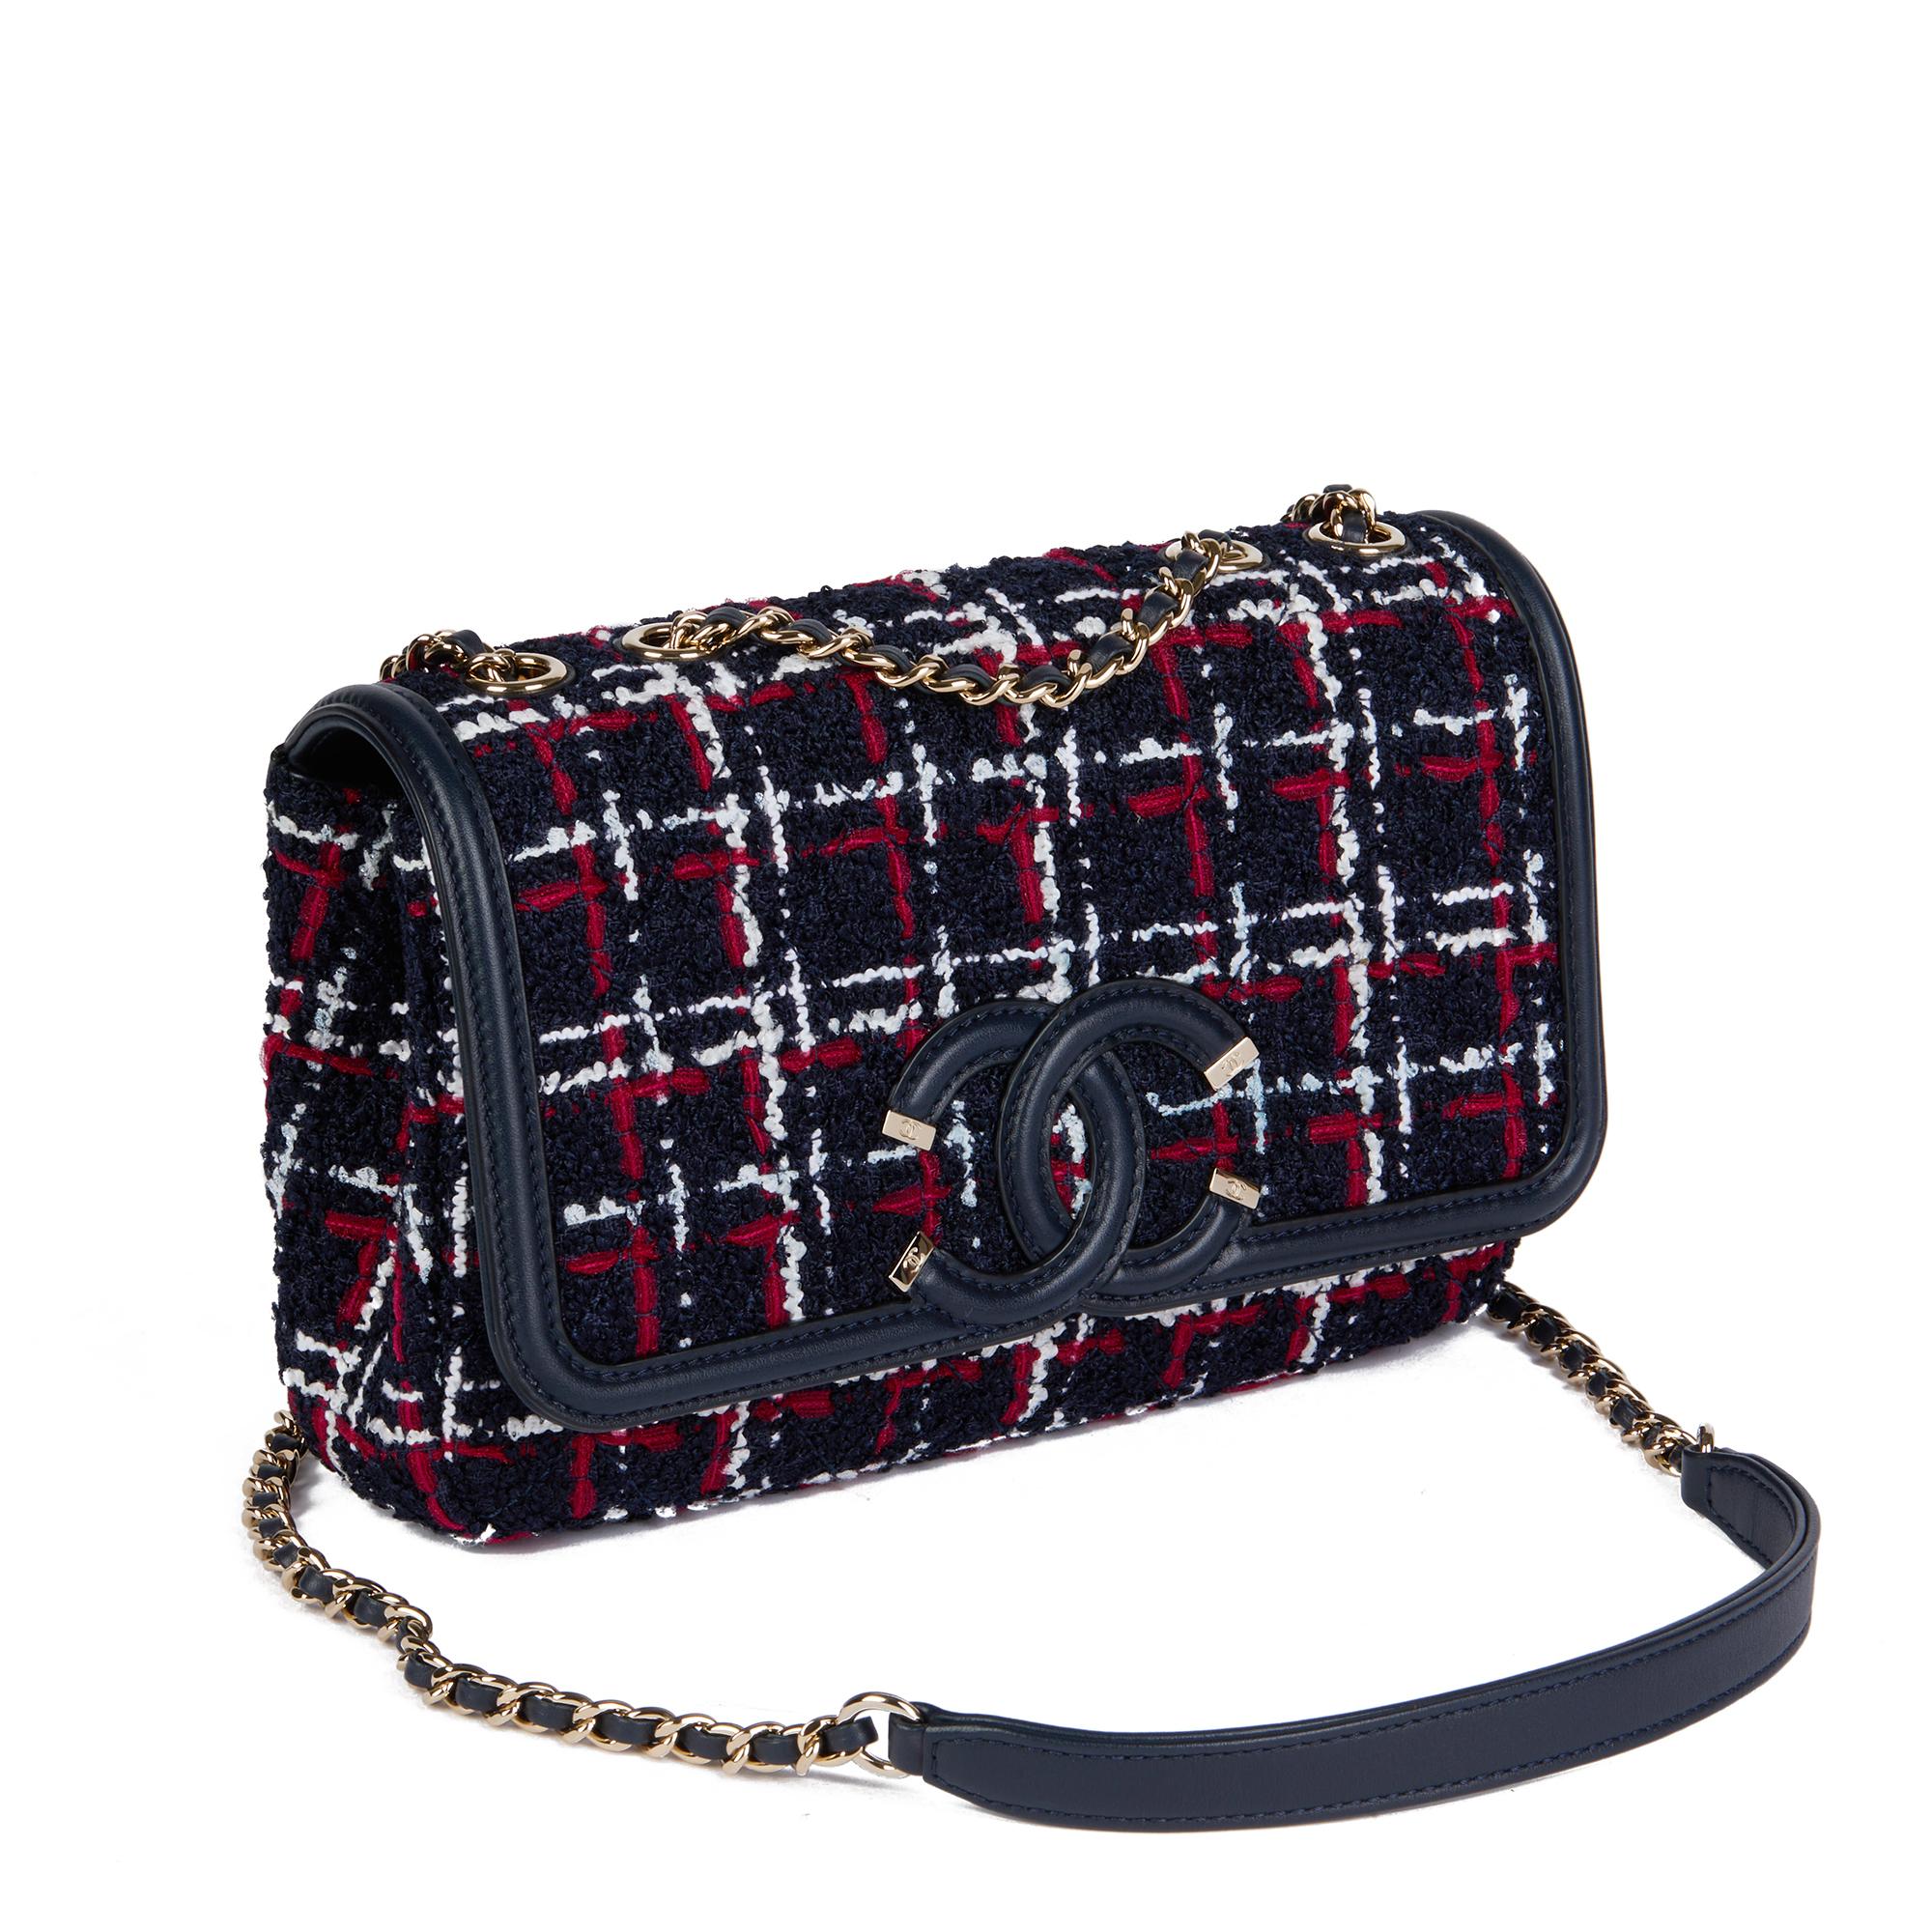 CHANEL
Navy, Red, White Tweed Fabric & Navy Lambskin Small Filigree Flap Bag

Serial Number: 30058595
Age (Circa): 2020
Accompanied By: Chanel Dust Bag, Box, Authenticity Card
Authenticity Details: Authenticity Card, Serial Sticker (Made in